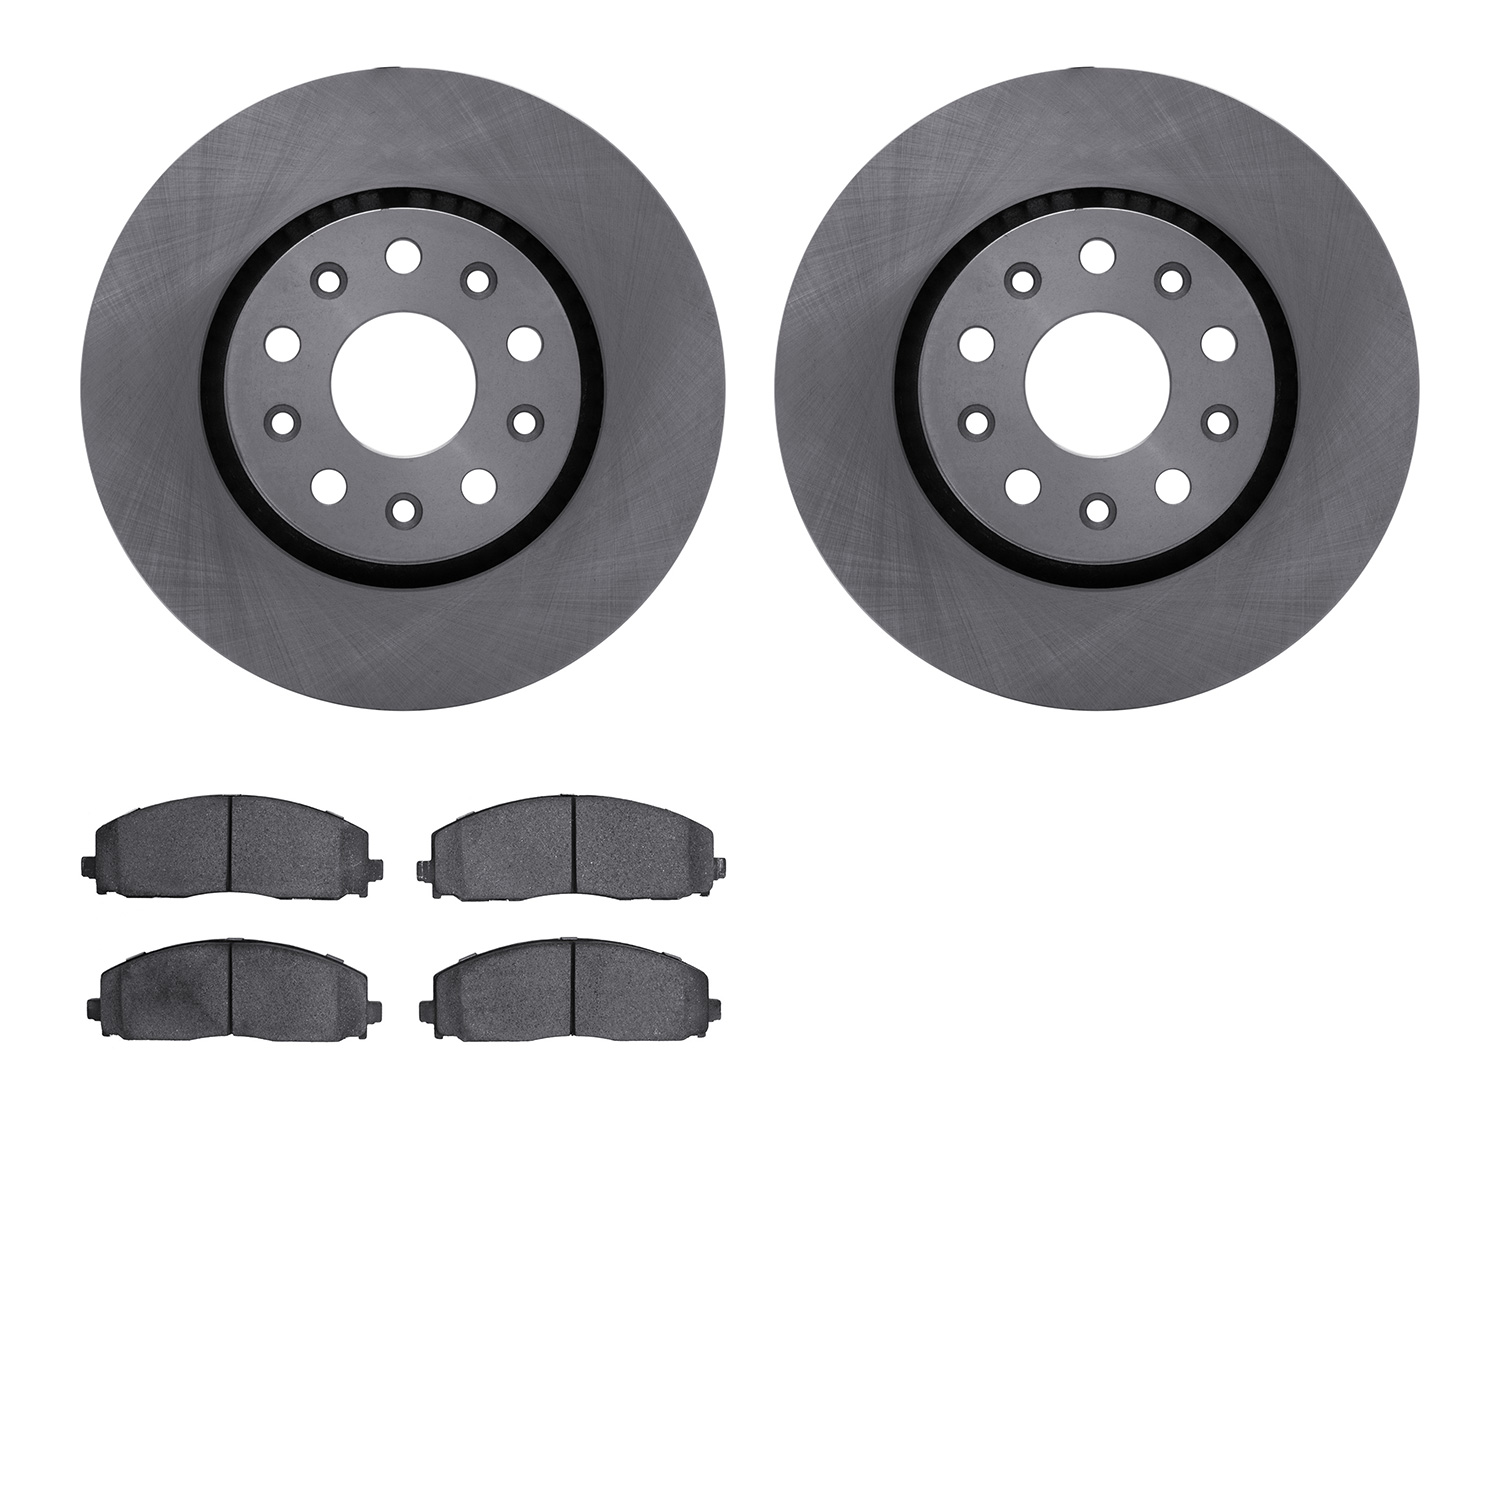 6402-42118 Brake Rotors with Ultimate-Duty Brake Pads, Fits Select Mopar, Position: Front